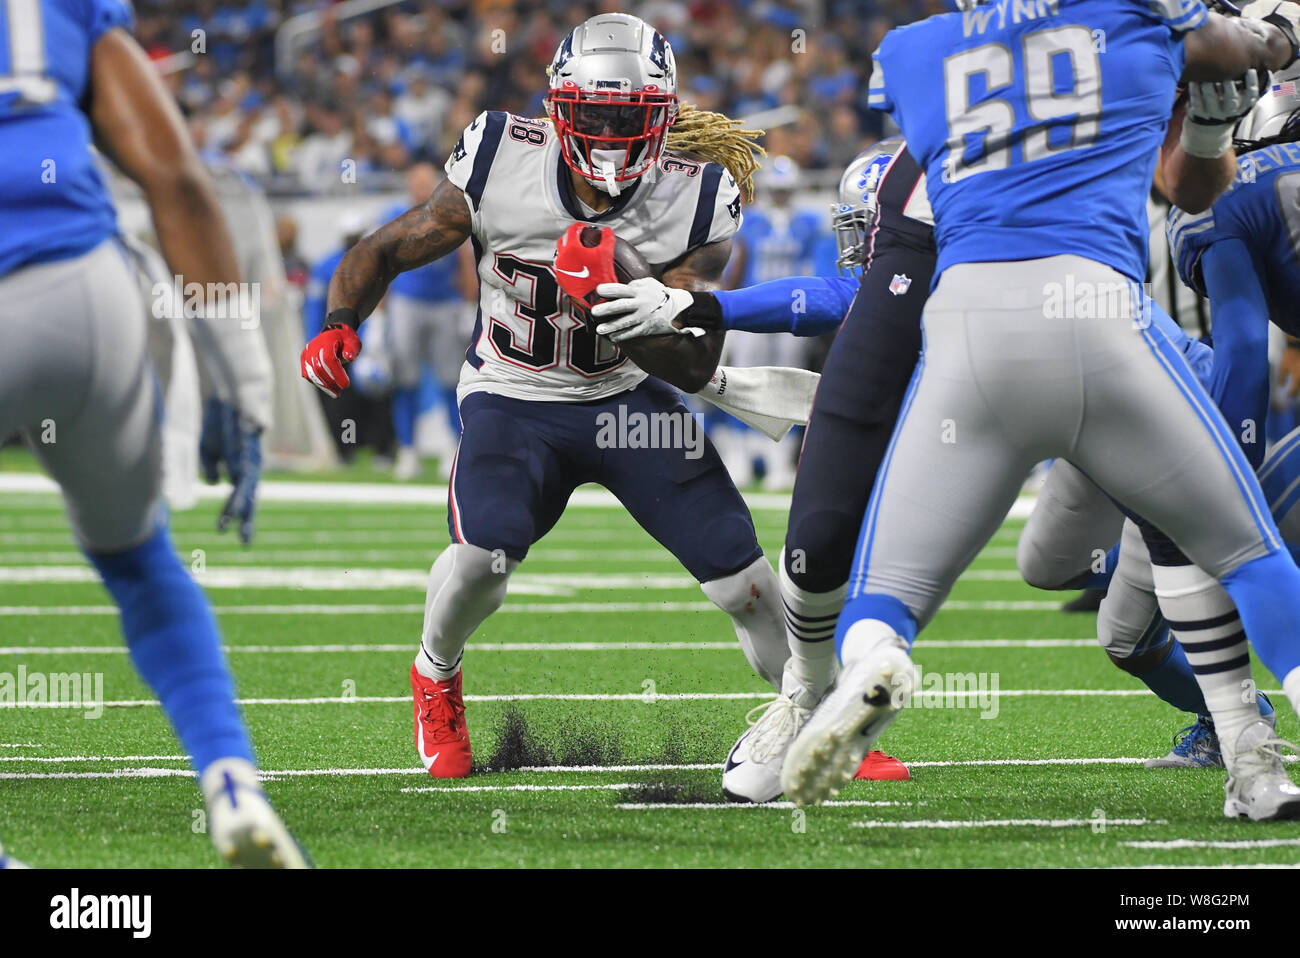 DETROIT, MI - AUGUST 8: New England Patriots RB Brandon Bolden (38) in action during during NFL pre-season game between New England Patriots and Detroit Lions on August 8, 2019 at Ford Field in Detroit, MI (Photo by Allan Dranberg/CSM) Stock Photo